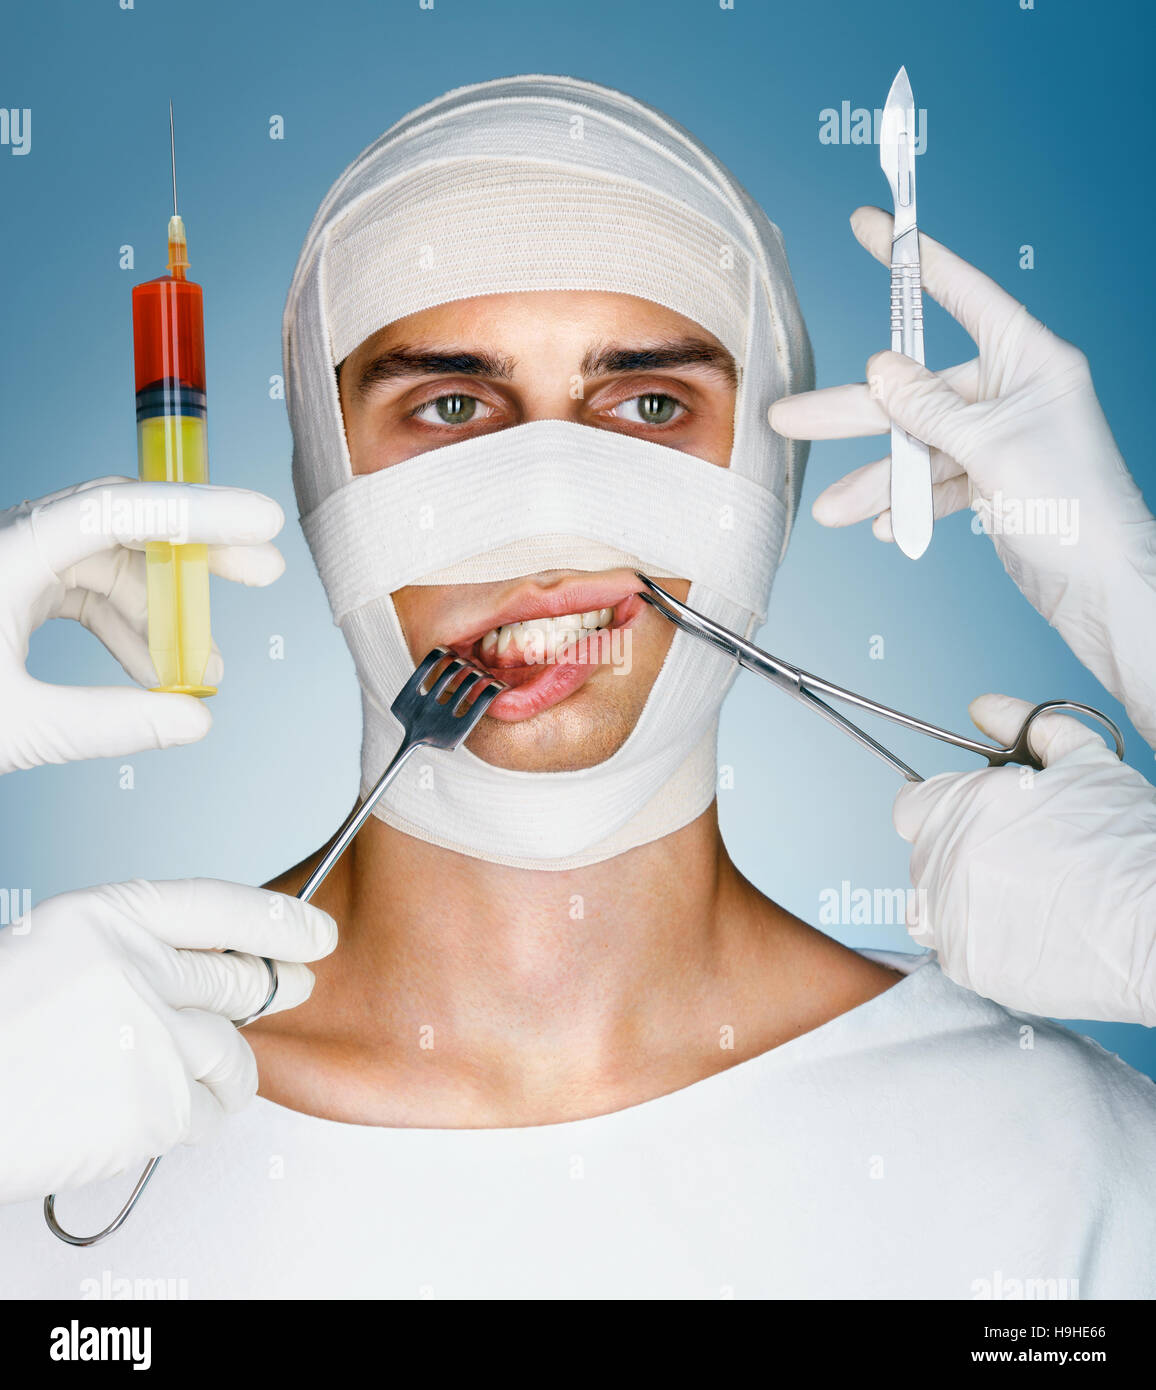 Victim of plastic surgery. Man wrapped in medical bandages while doctors with syringes, surgical clamp, hook and scalpels near his face. Beauty concep Stock Photo